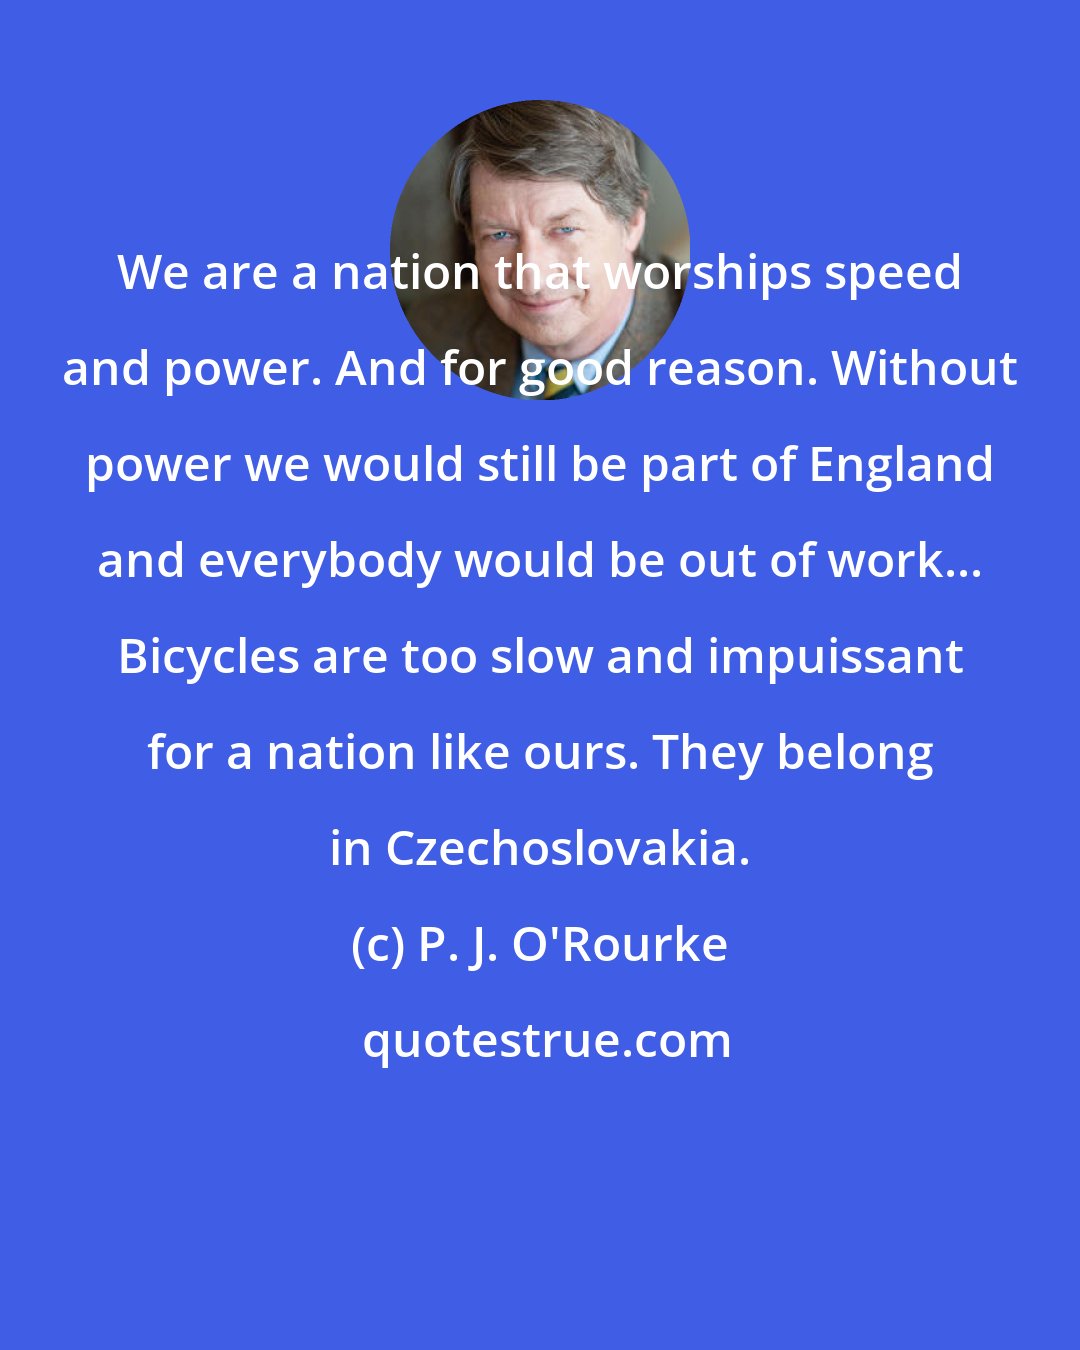 P. J. O'Rourke: We are a nation that worships speed and power. And for good reason. Without power we would still be part of England and everybody would be out of work... Bicycles are too slow and impuissant for a nation like ours. They belong in Czechoslovakia.